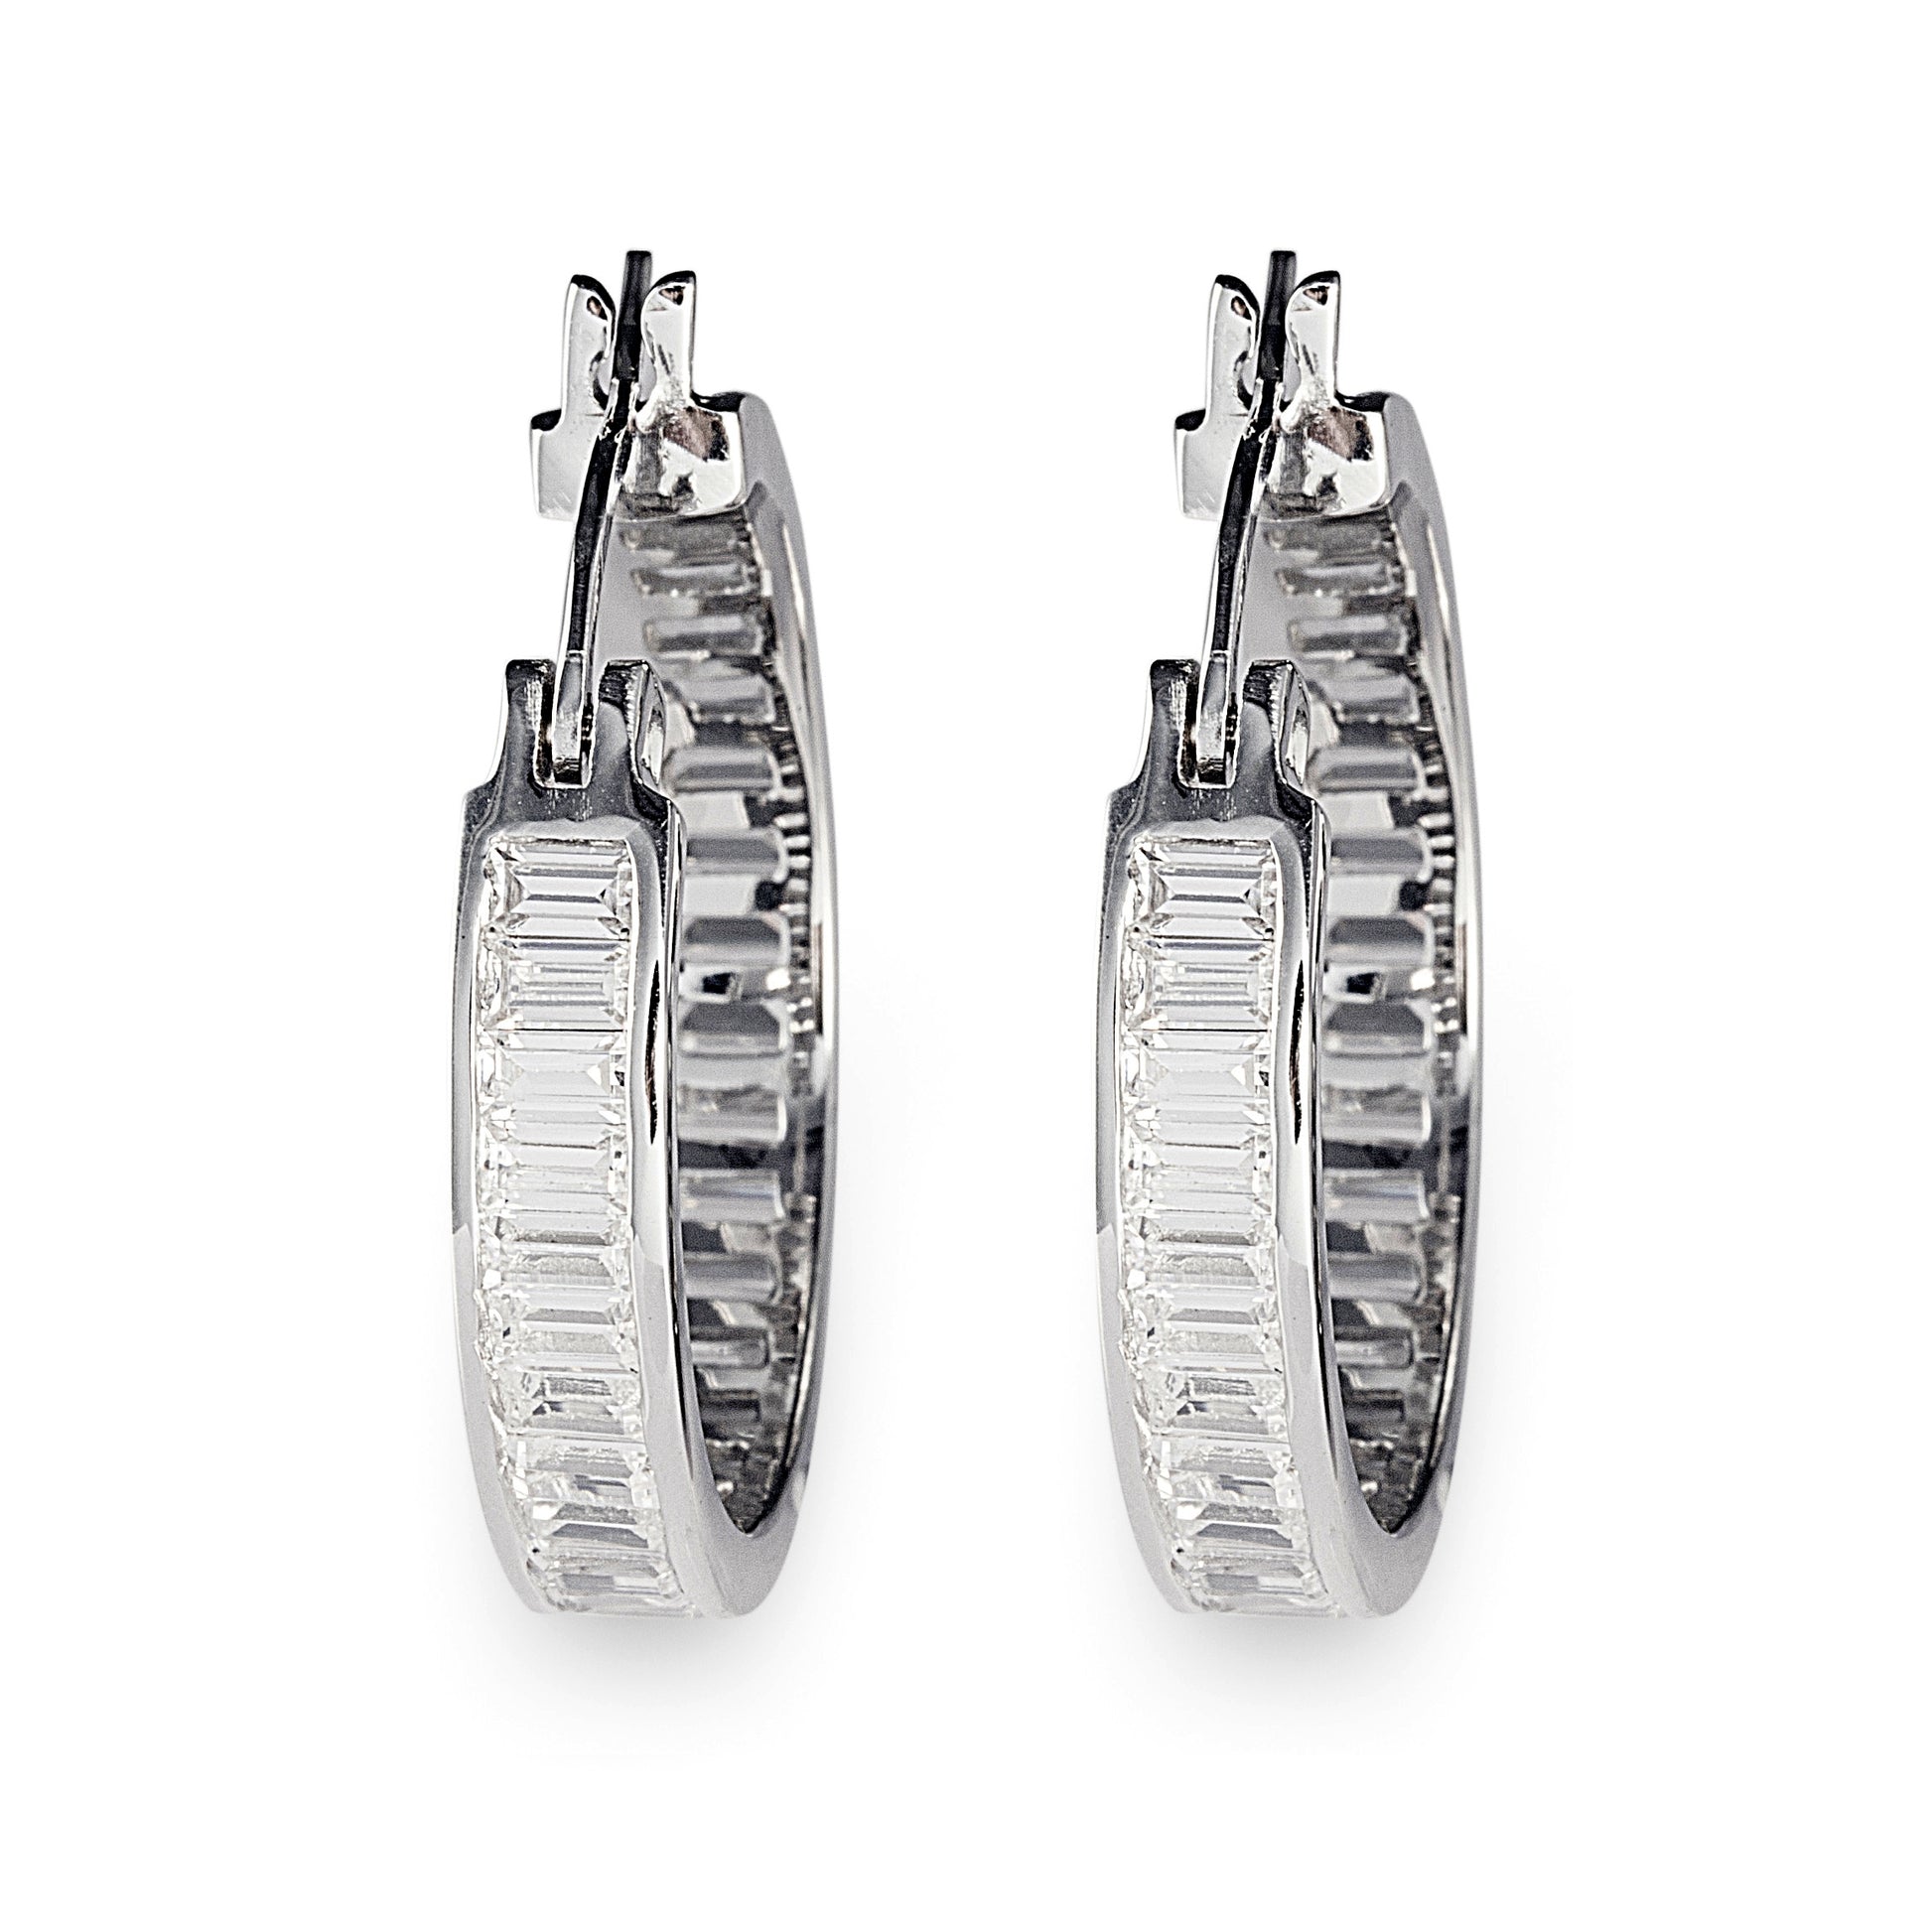 Glamorous Large Charlotte Hoop Earrings in 925 sterling silver with baguette-cut cubic zirconia stones. Approx 28mm in diameter. Add instant elegance to any look. Worldwide shipping + FREE shipping within Australia ($150+ spend)